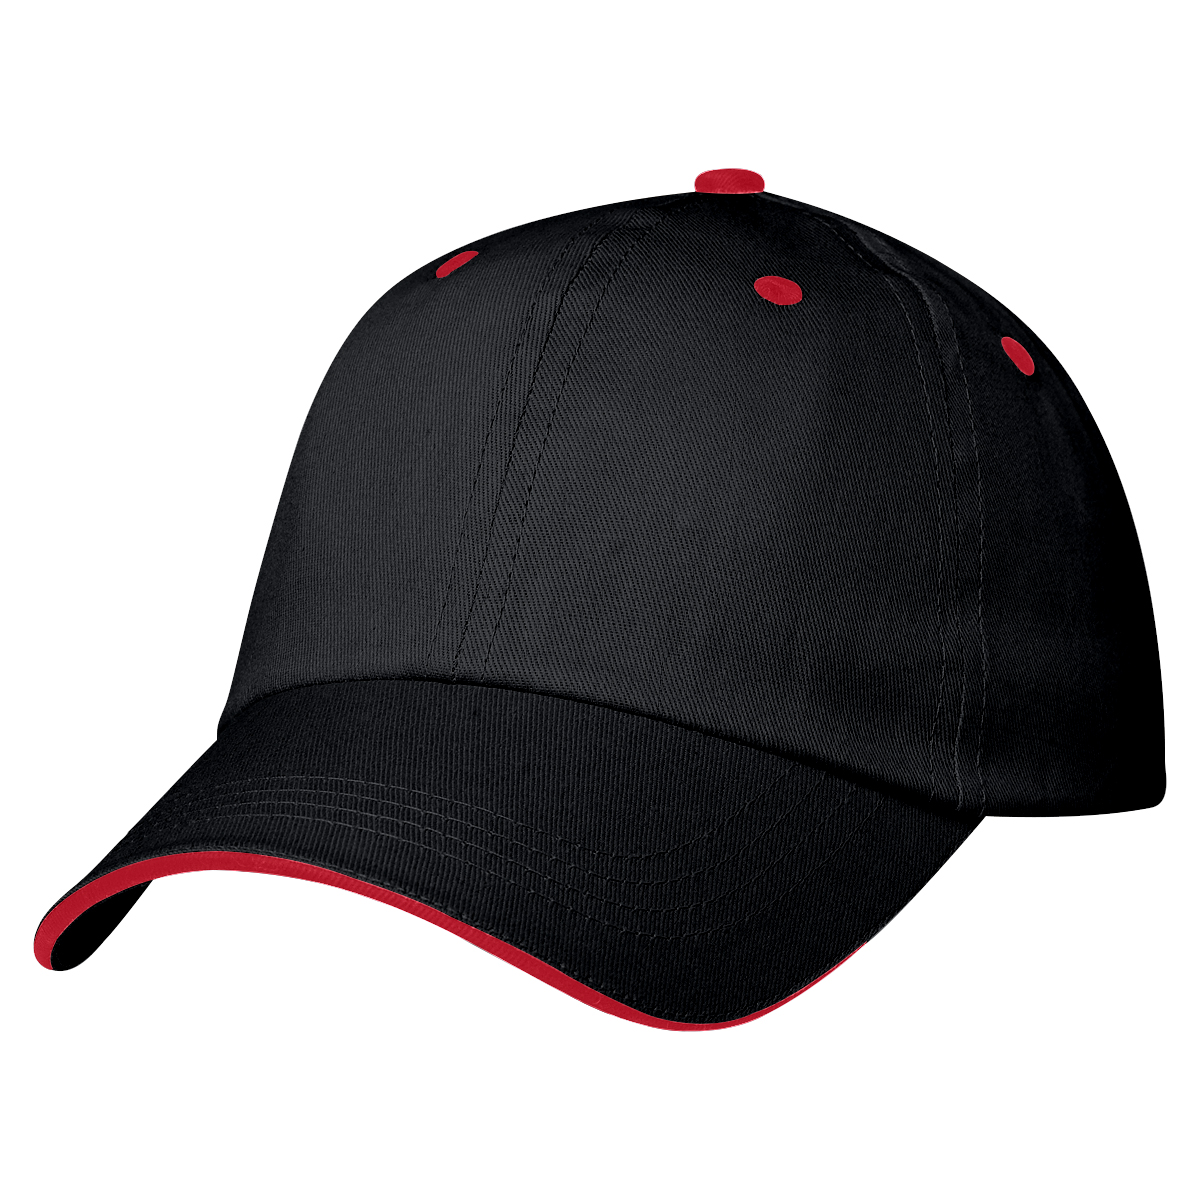 Black w/ Red Accents Price Buster Sandwich Cap